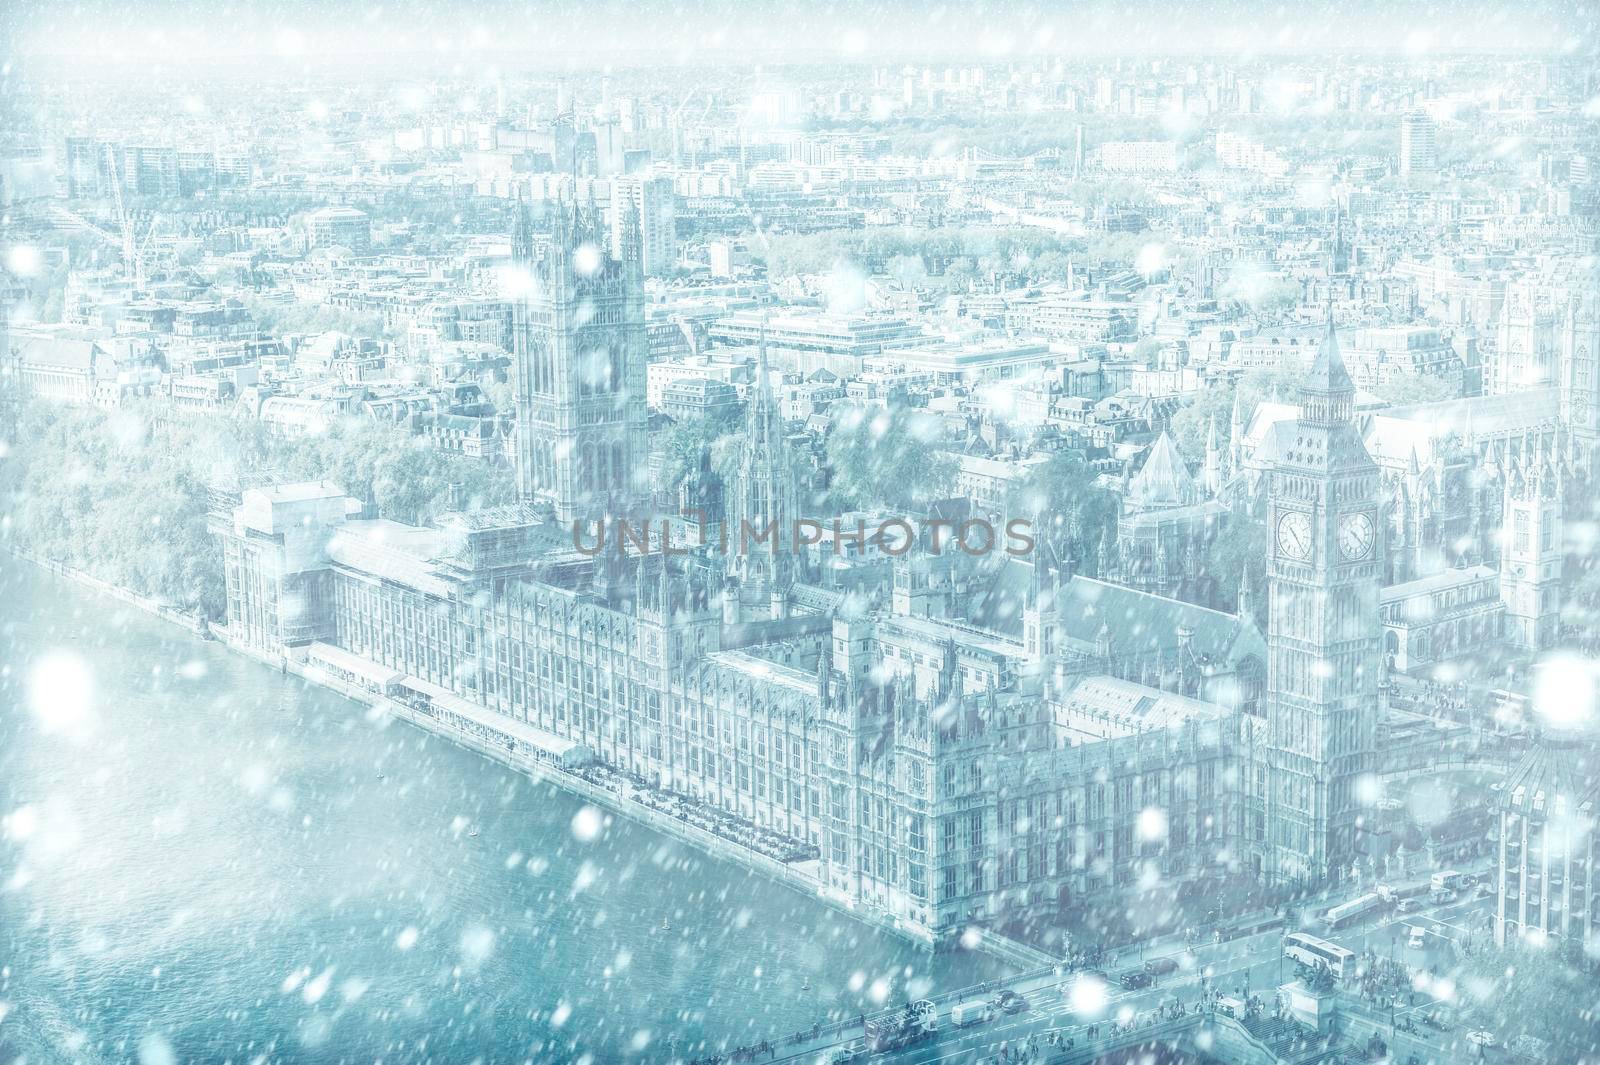 View of House of Parliament in London with snow by cla78